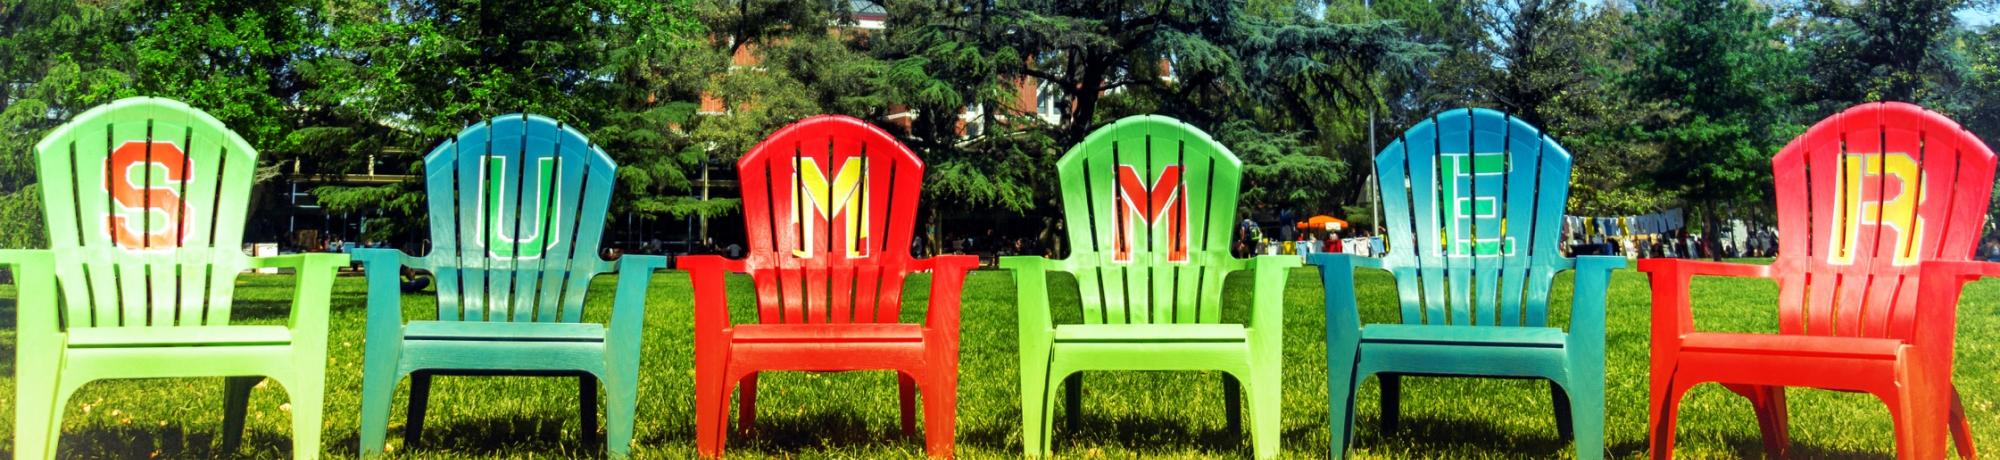 Chairs with SUMMER written across